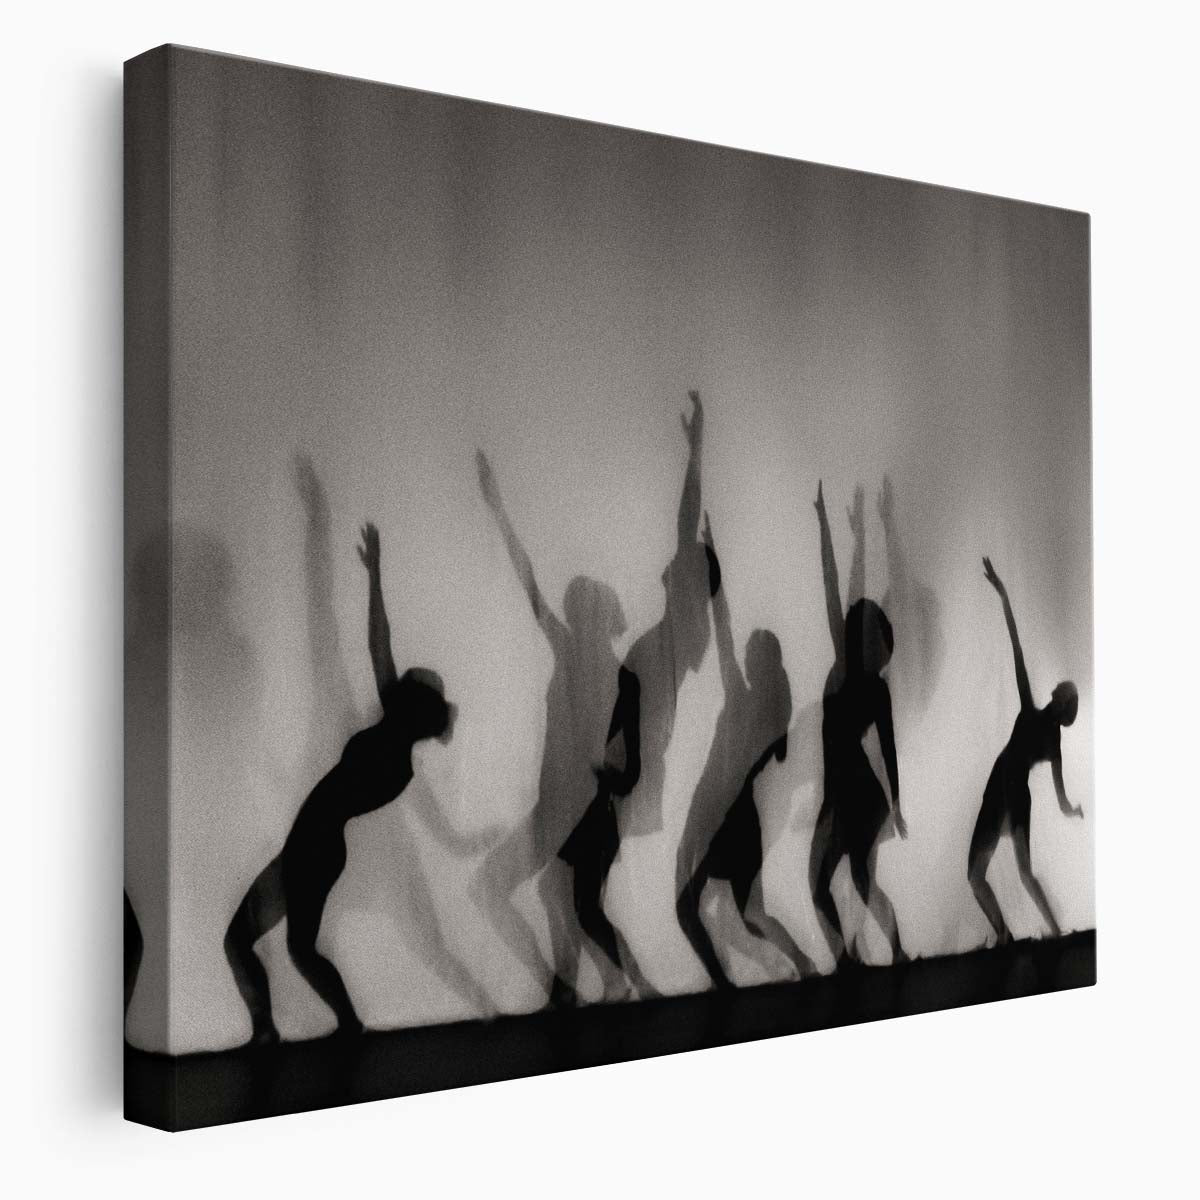 Monochrome Dancer Silhouettes Abstract Wall Art by Luxuriance Designs. Made in USA.